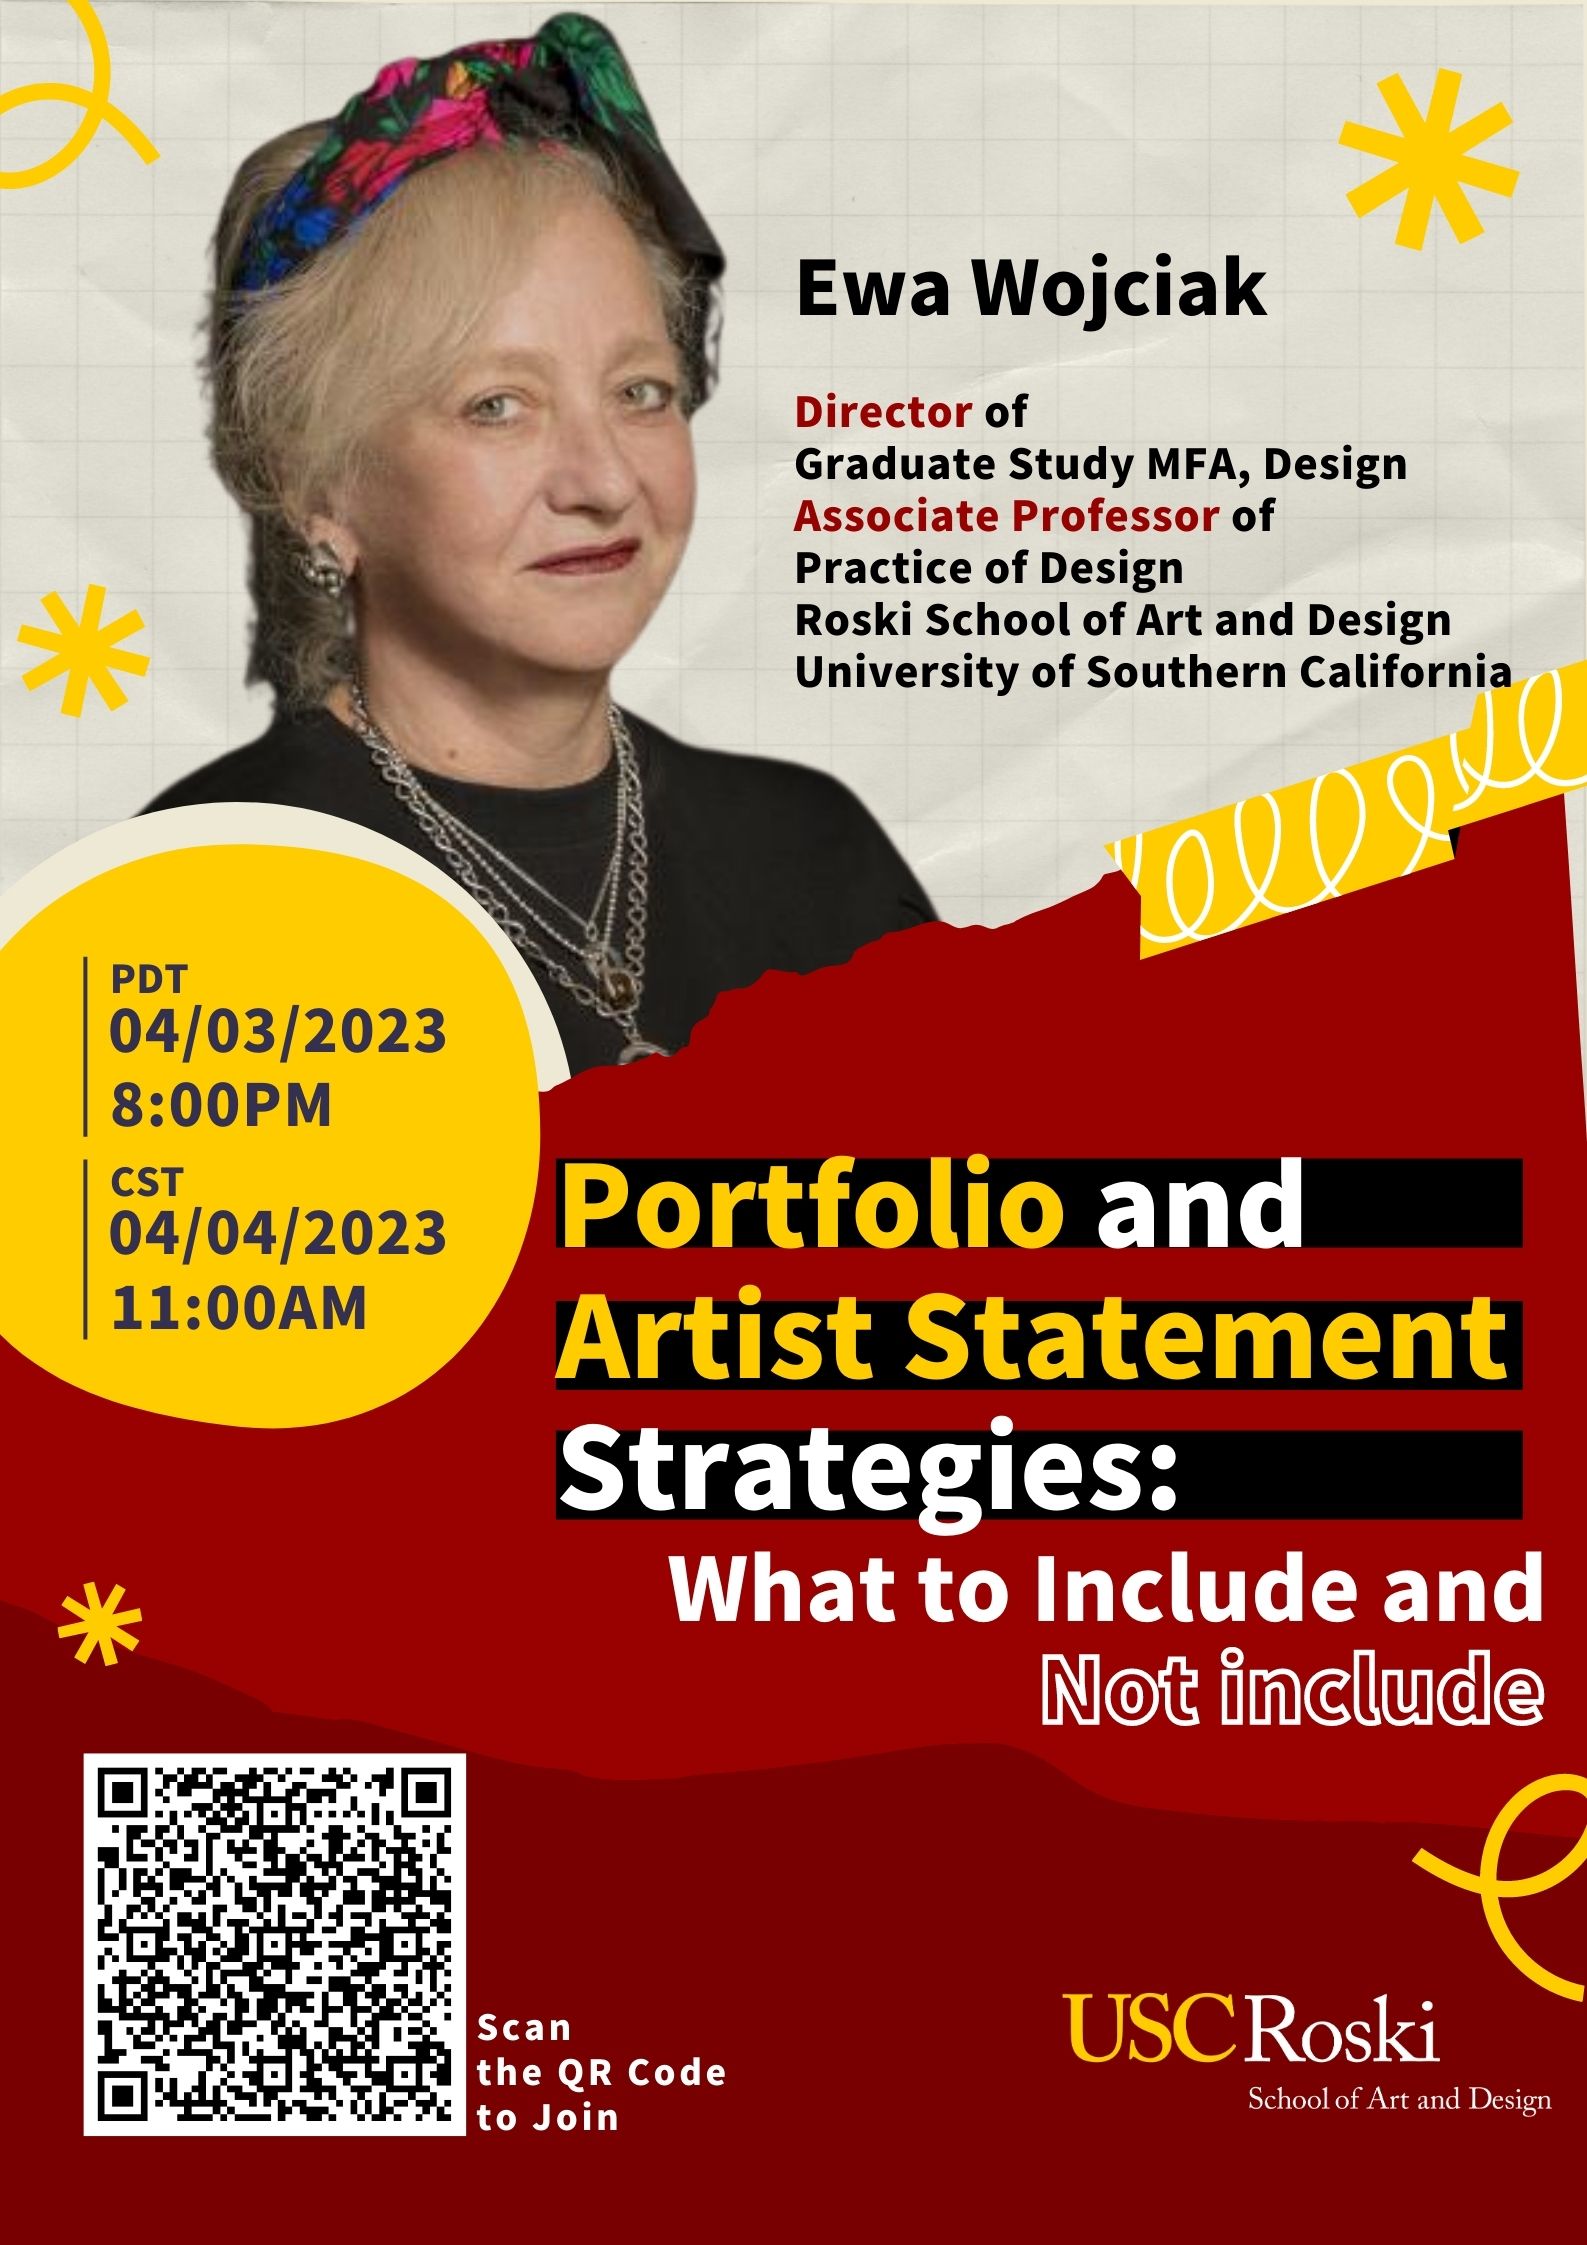 Portfolio and Artist Statement Strategies: What to include and not include